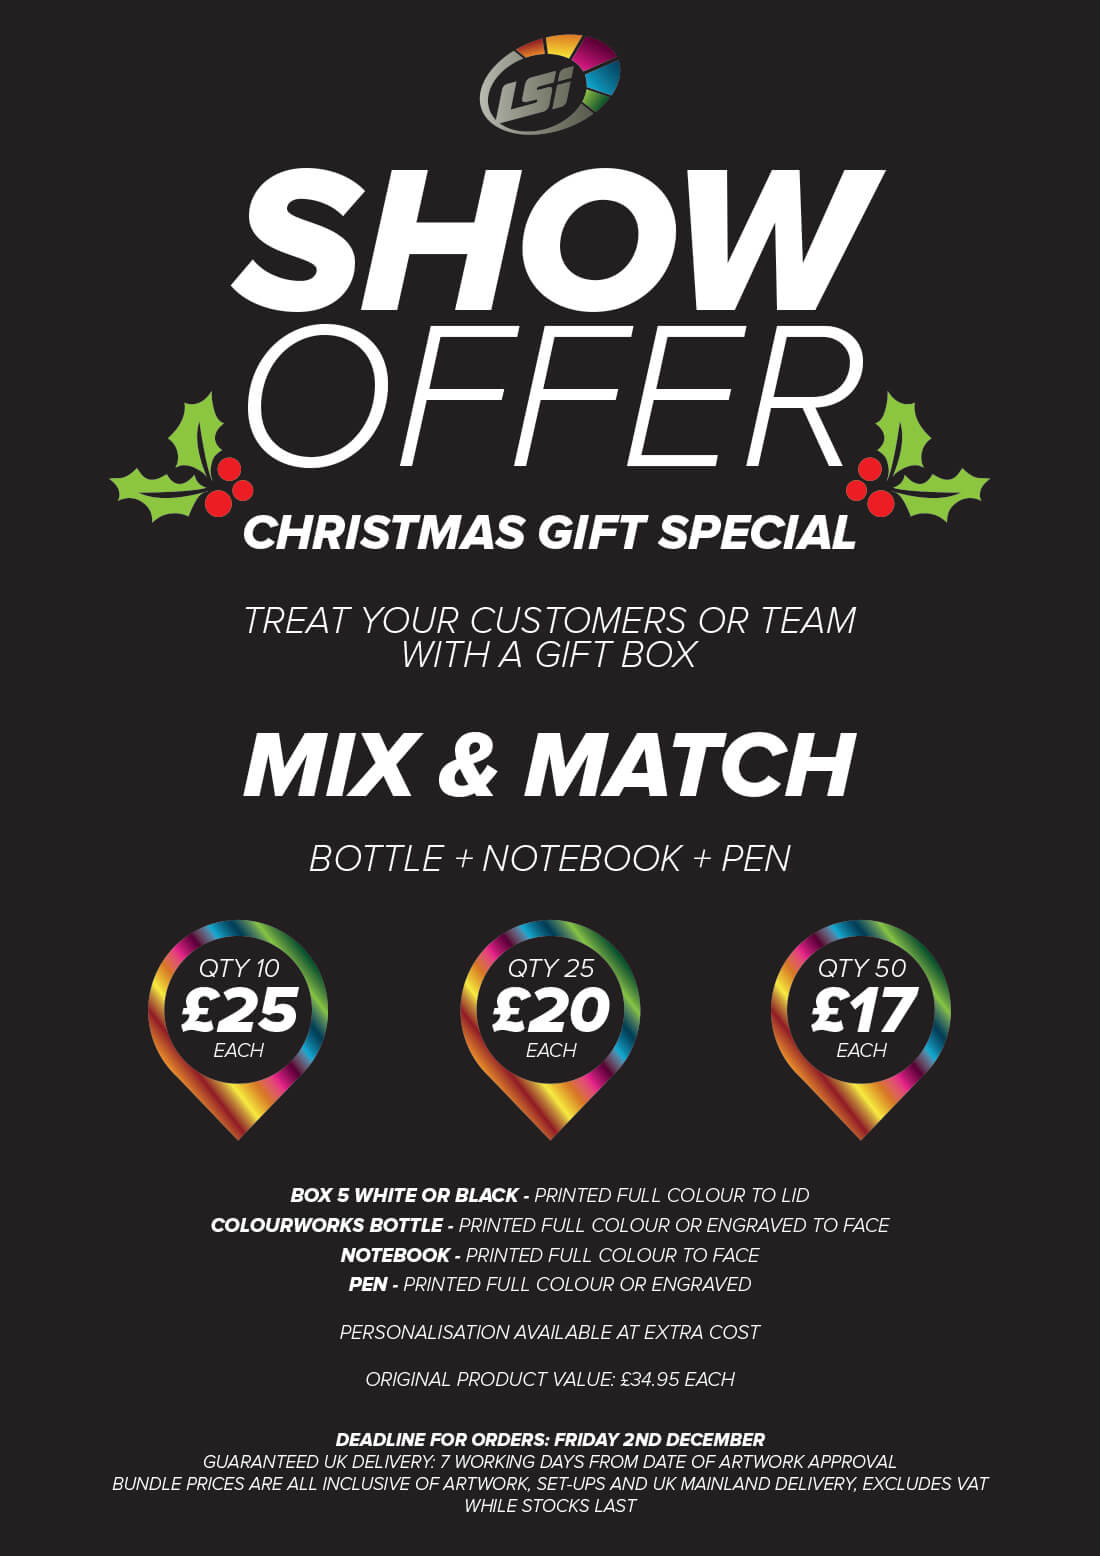 Show offer, christmas gift special